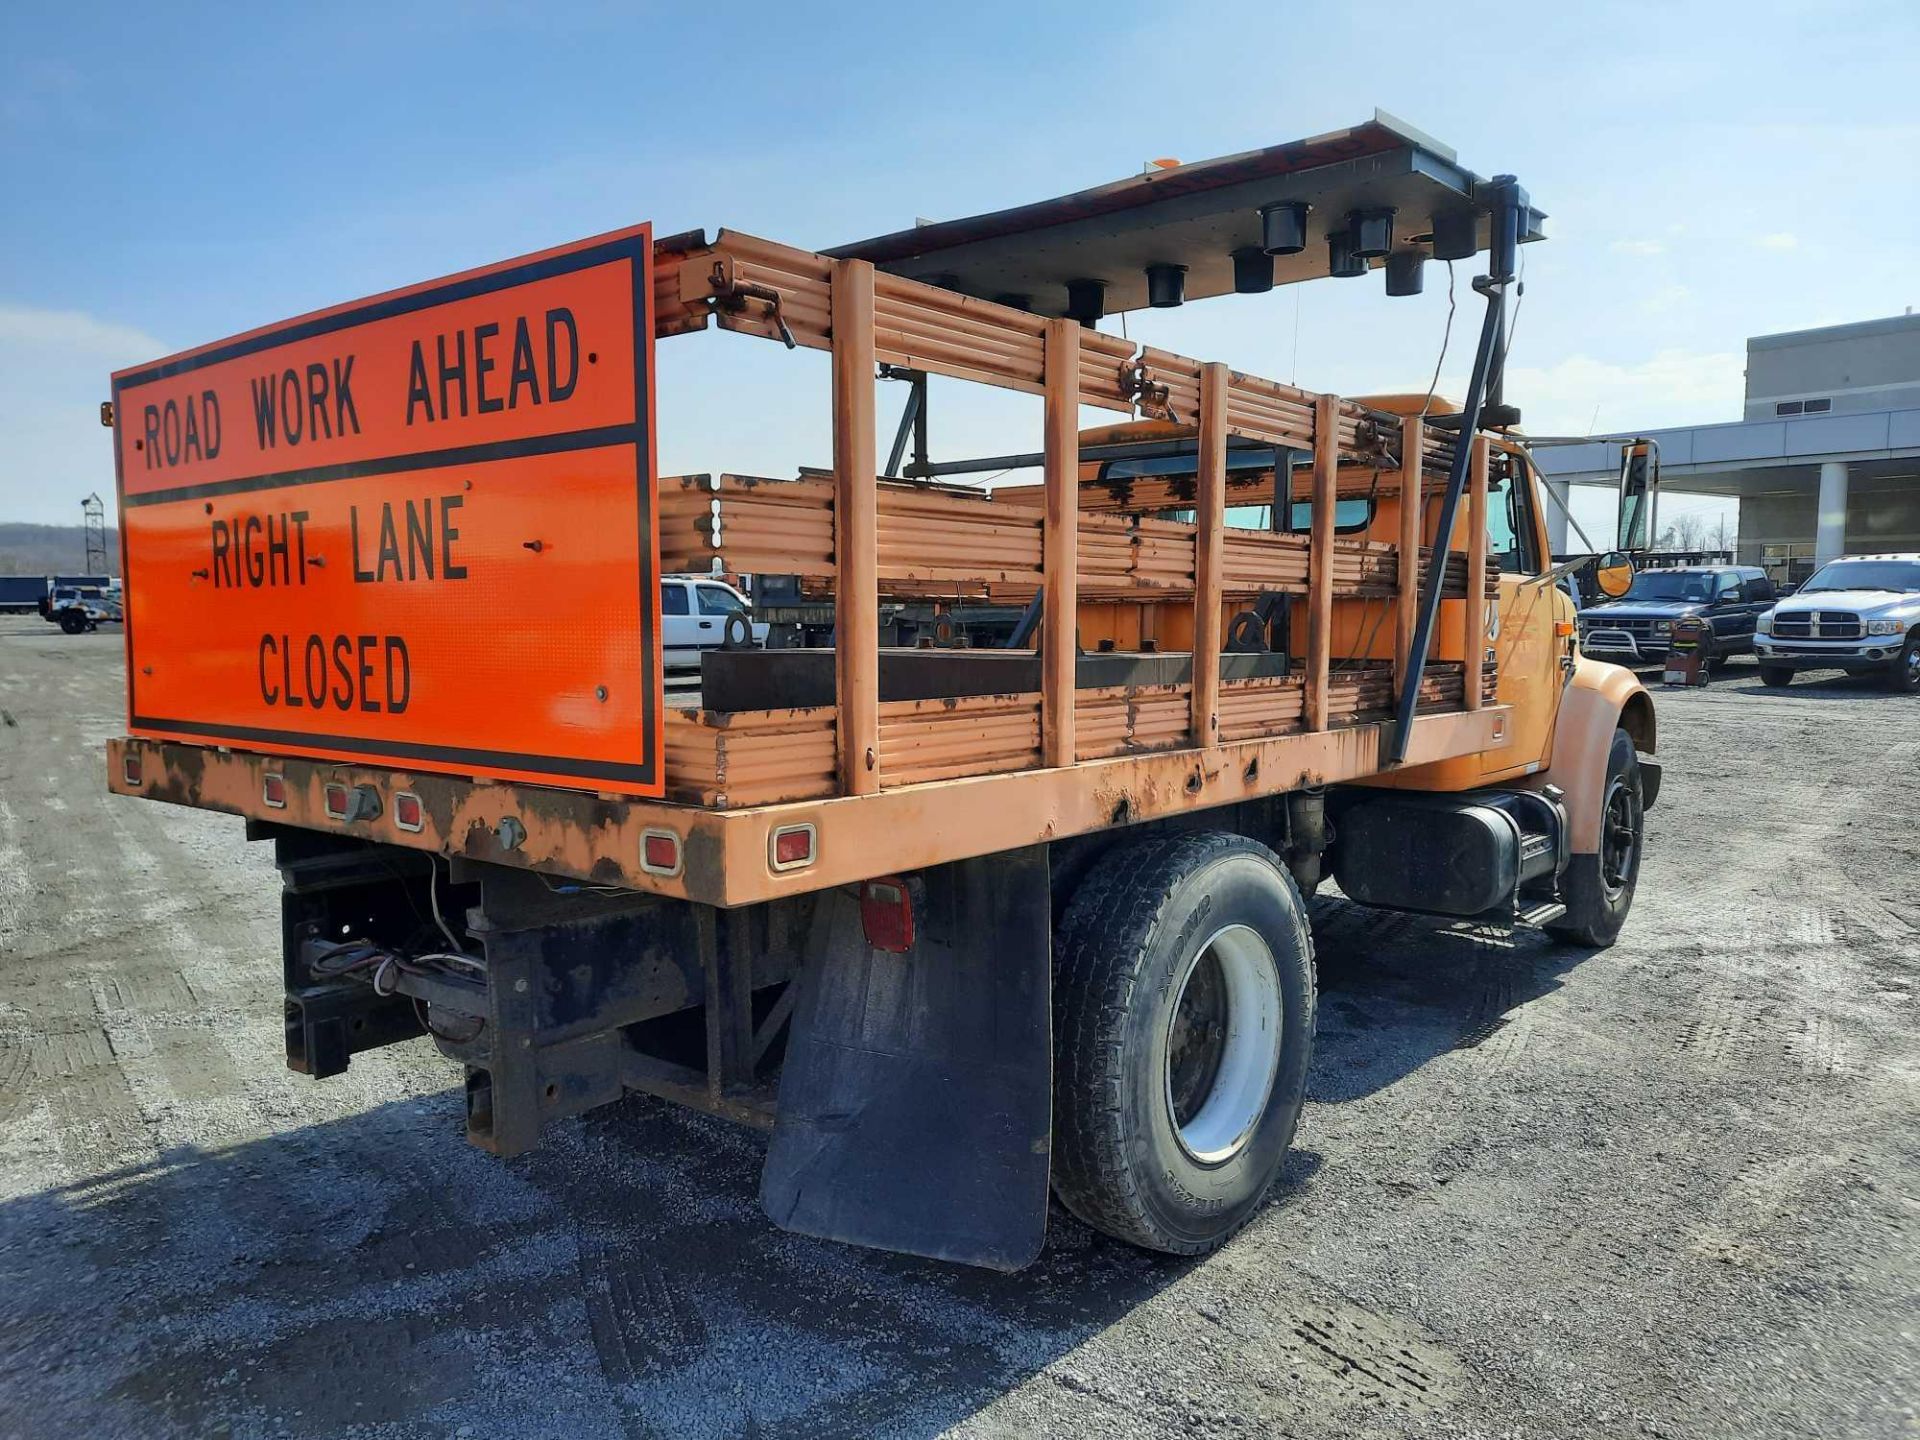 1996 INTL. 4700 STAKEBODY W/ ARROW BOARD TRUCK (VDOT UNIT #: R02715) - Image 3 of 16